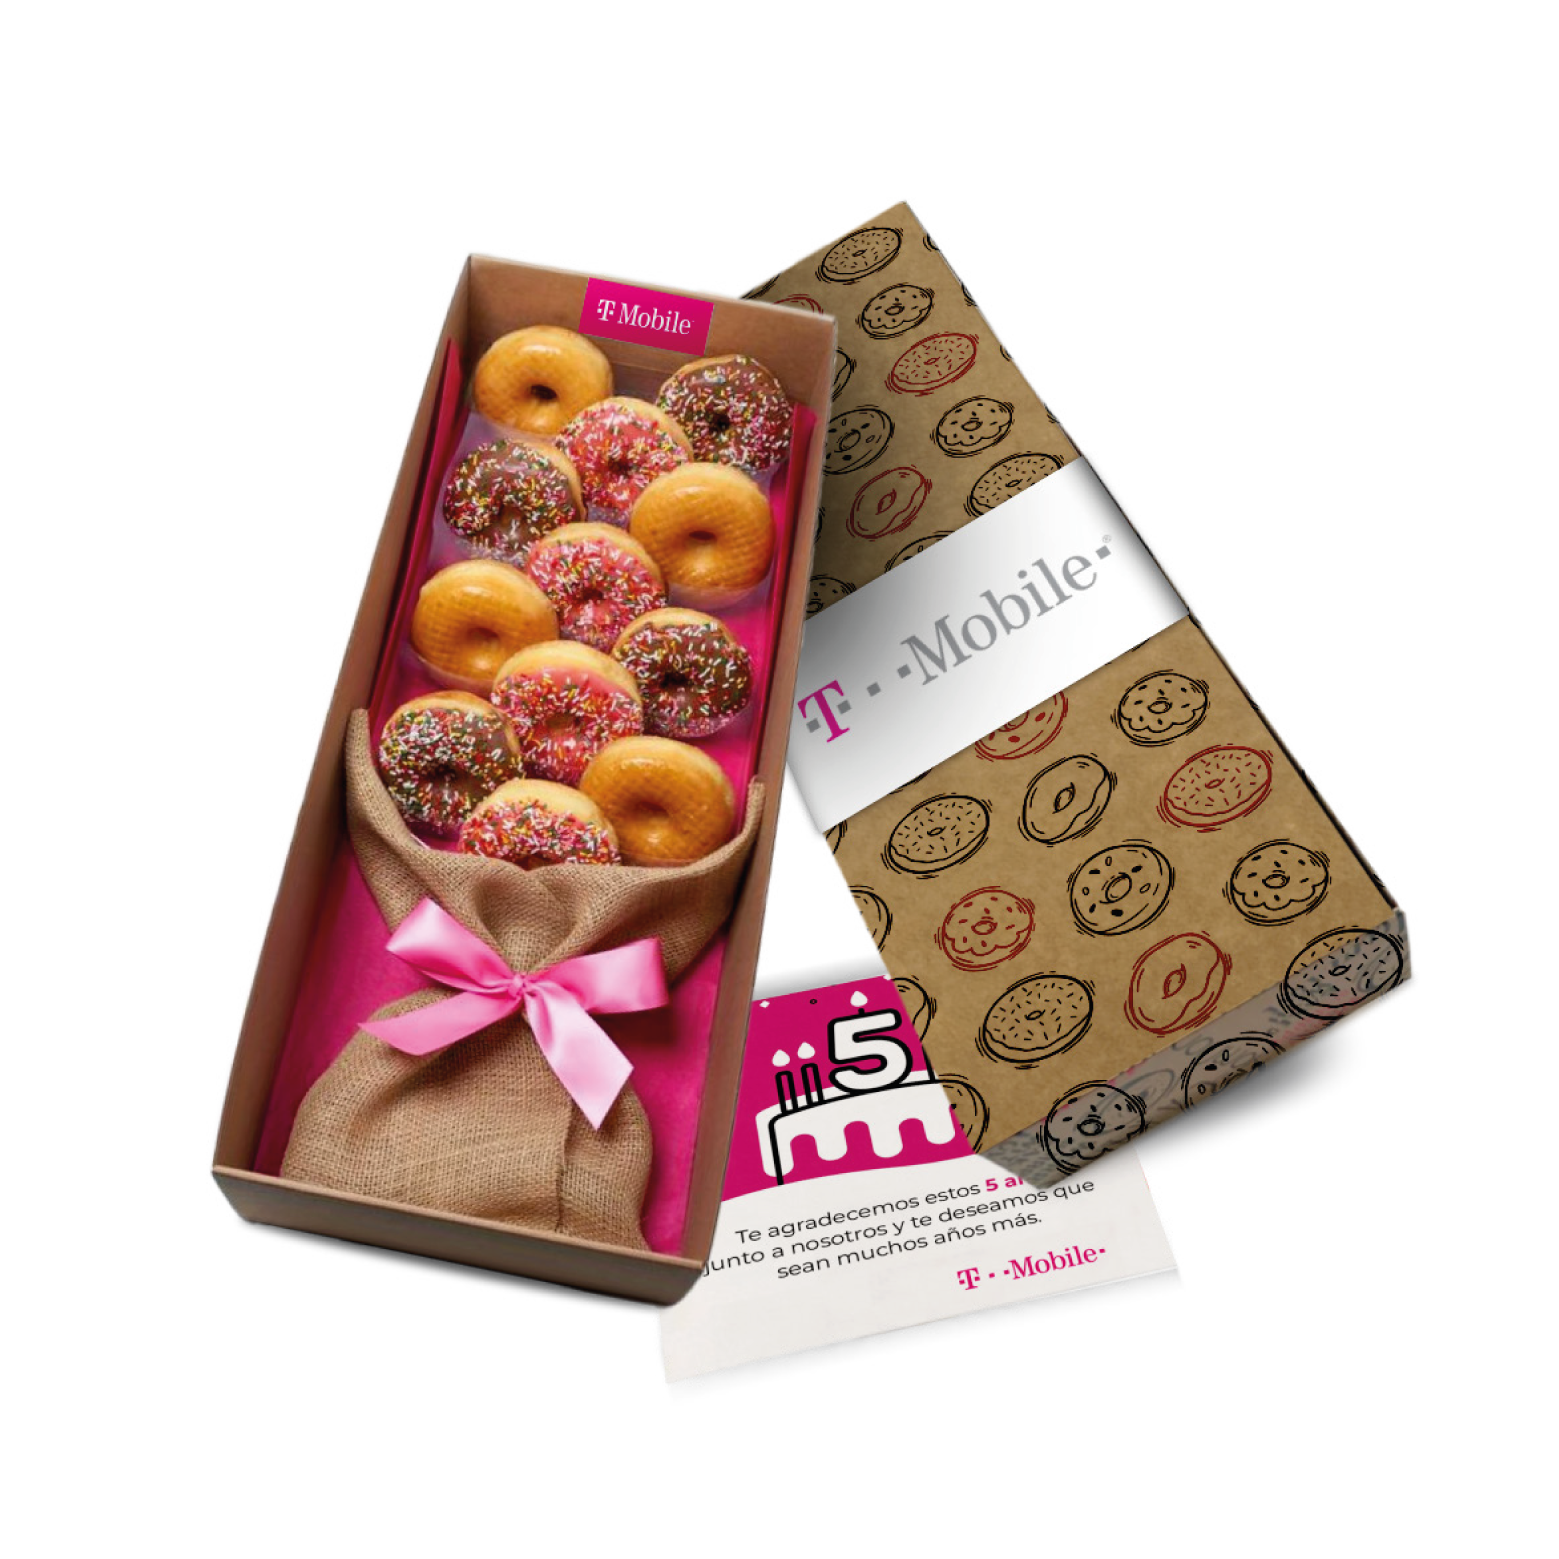 Box with bouquet of donuts